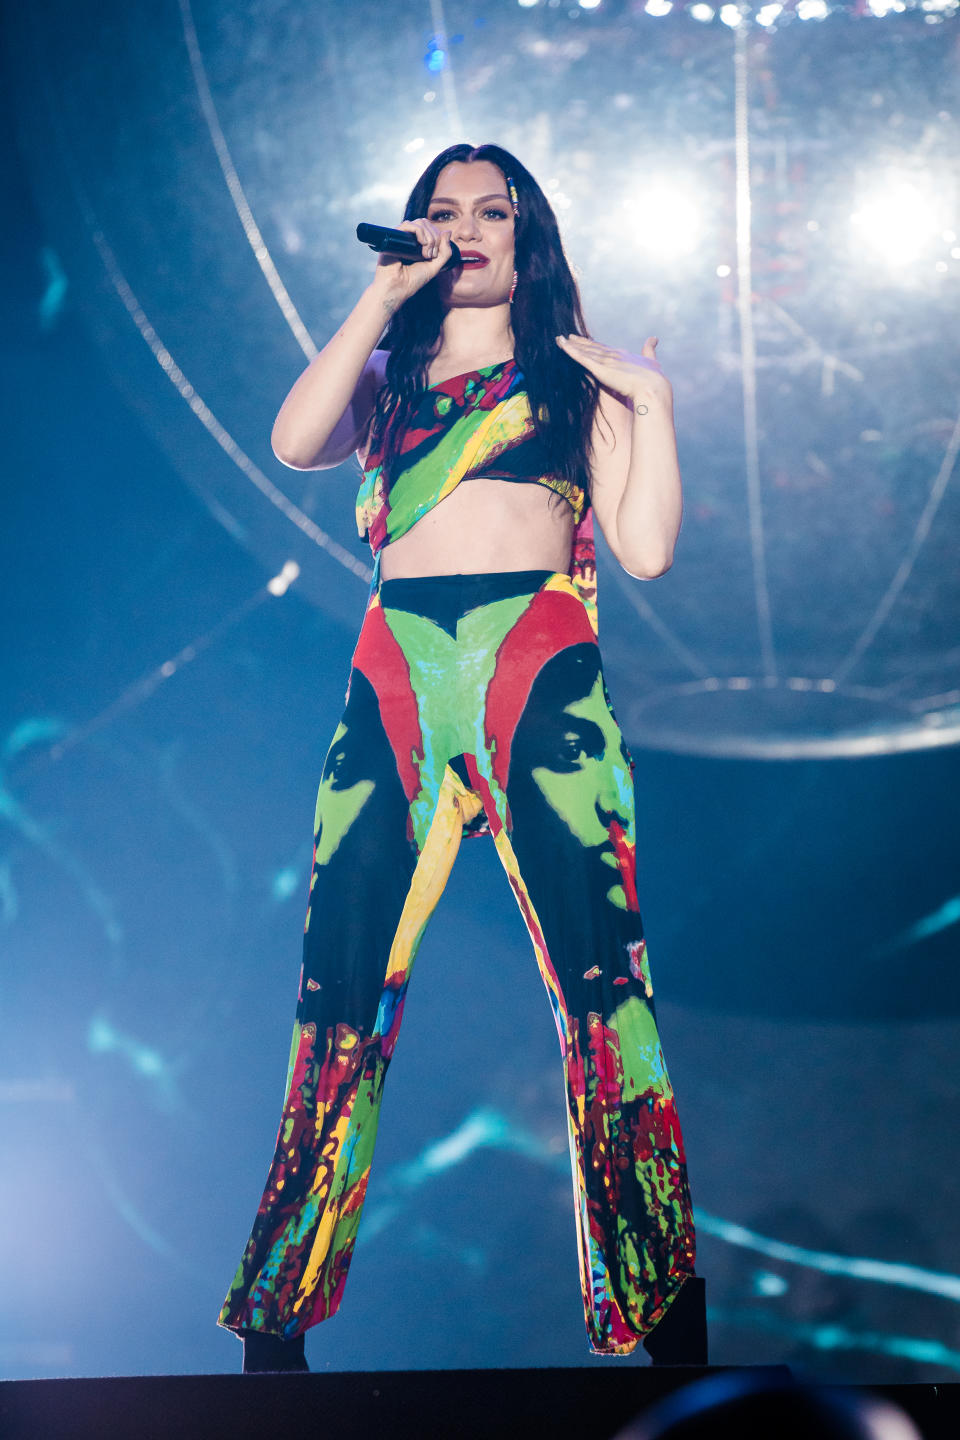 RIO DE JANEIRO, BRAZIL - SEPTEMBER 29: Jessie J performs live on stage during the third day of the Rock In Rio Music Festival at Cidade do Rock on September 29, 2019 in Rio de Janeiro, Brazil. (Photo by Mauricio Santana/Getty Images)